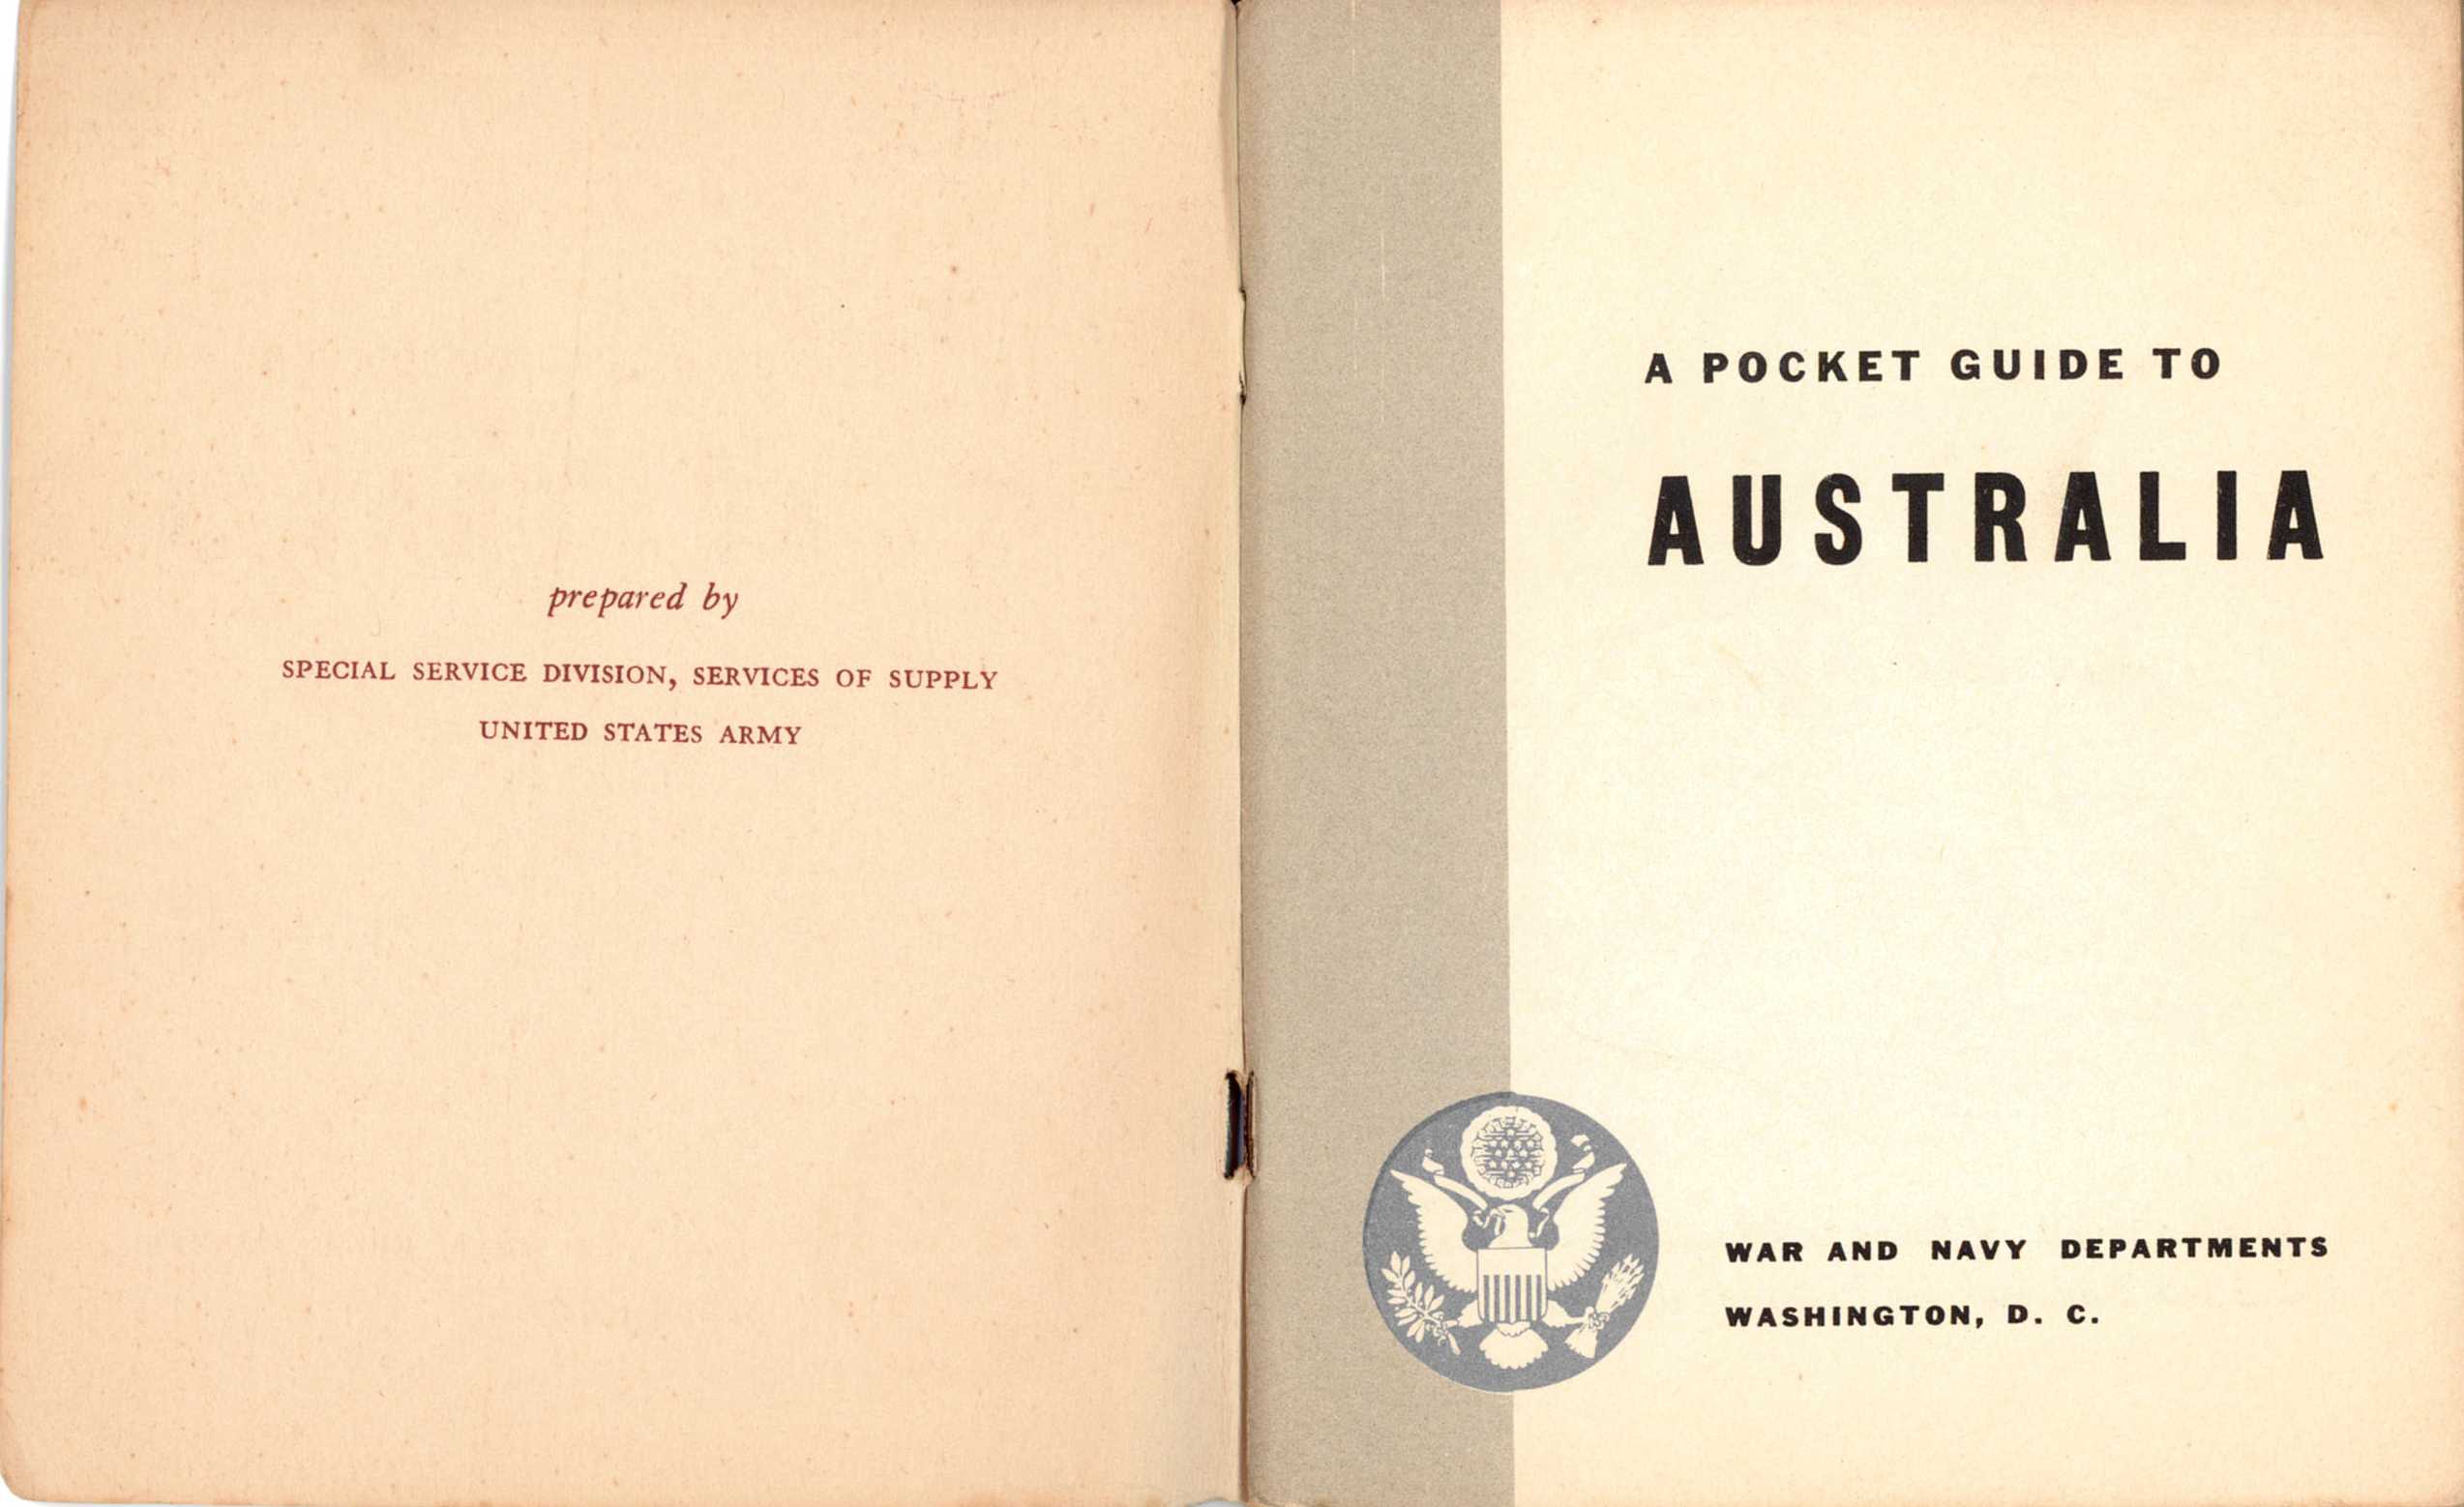 Pocket Guide to Australia title page